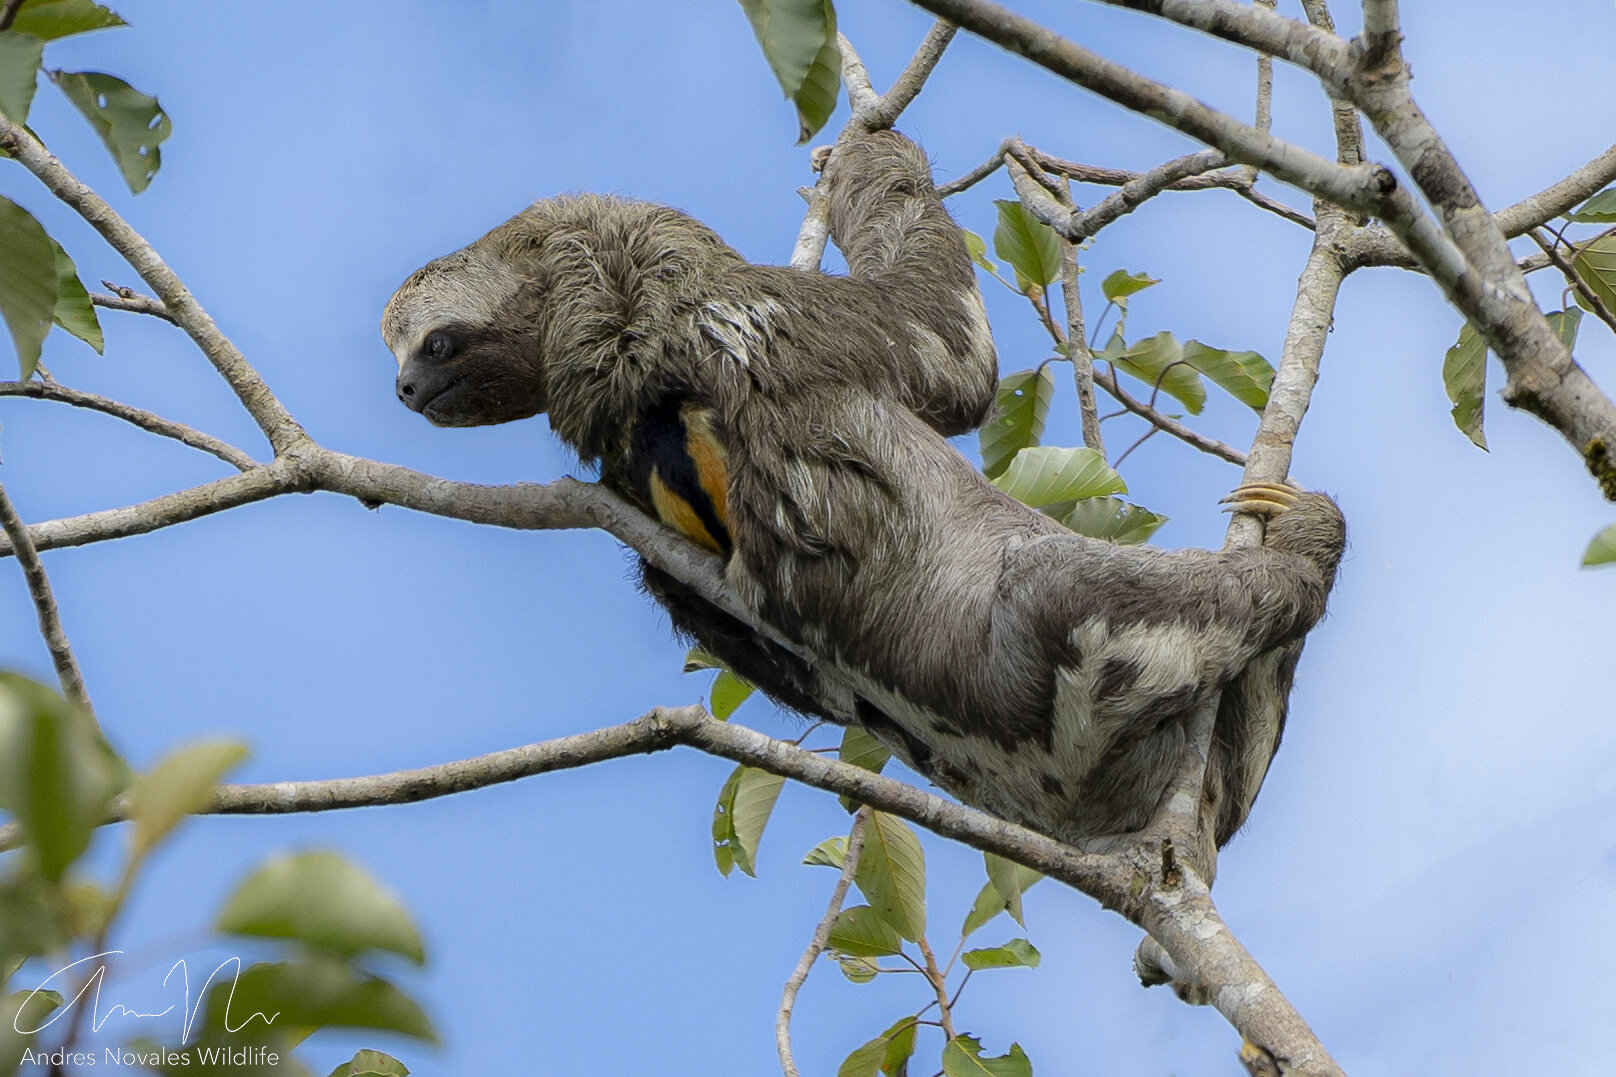  sloth in relaxing, hanging position, blue sky, in cecropia tree 